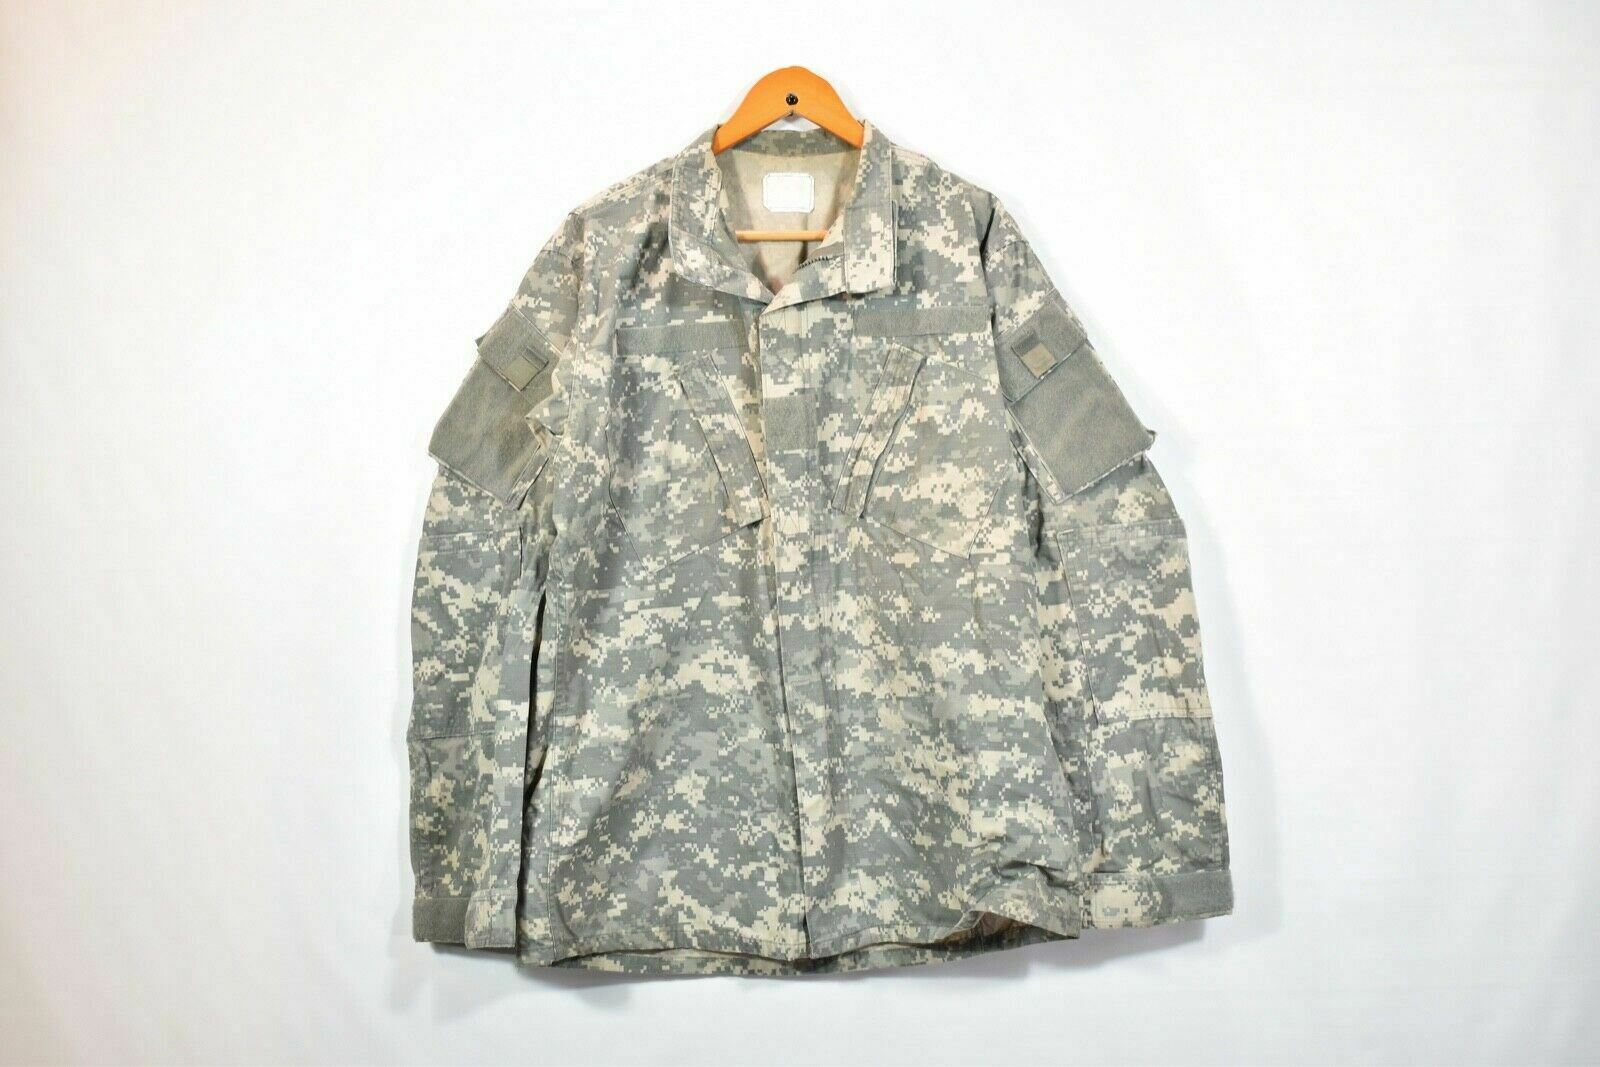 Army Combat Top Jacket Coat Small Long Digital Camo Military Top Used